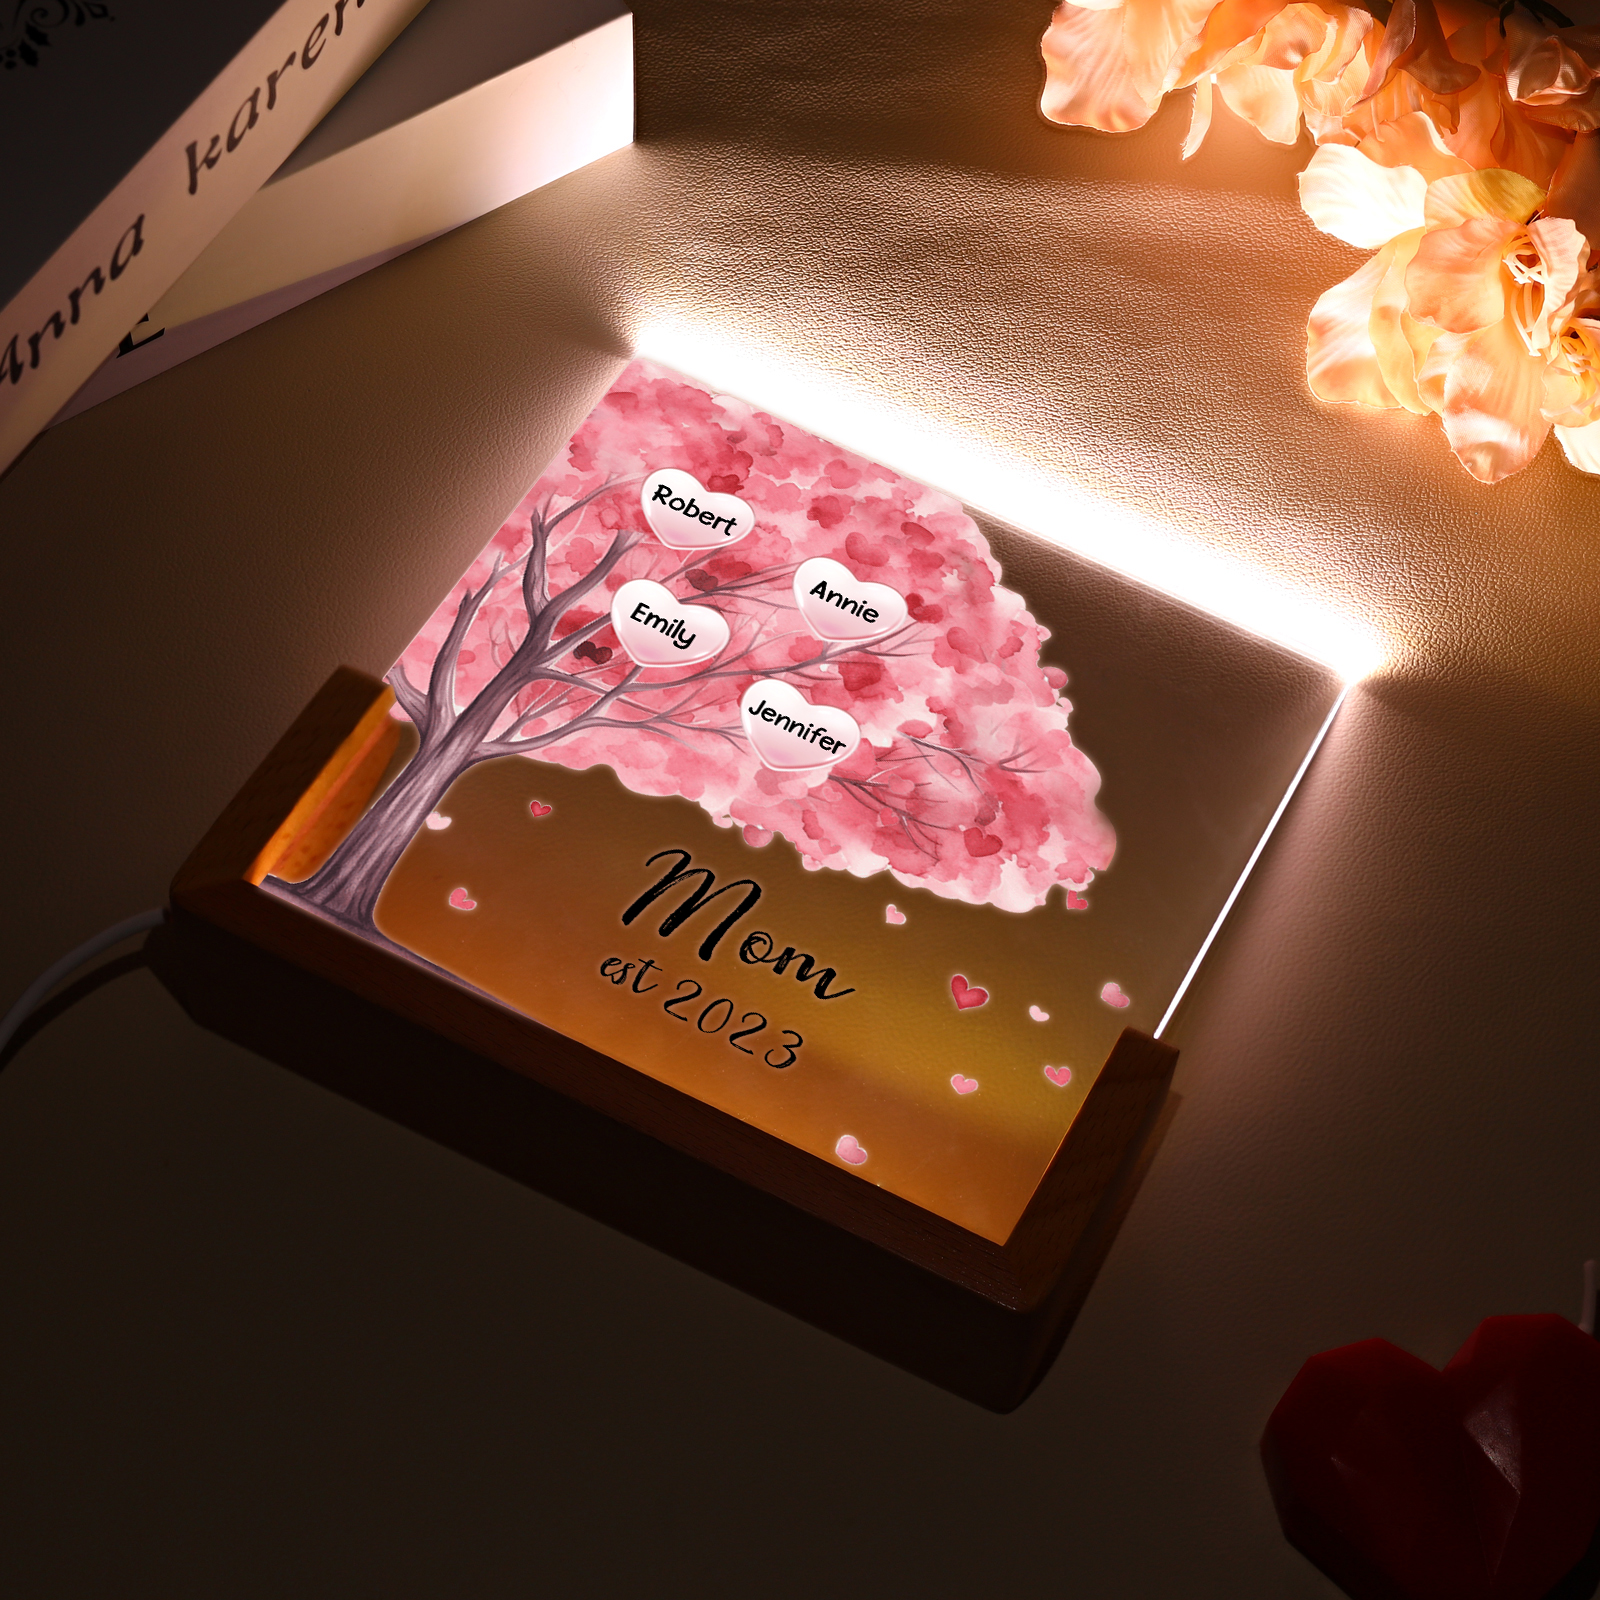 4 Names - Personalized Sakura Tree Night Light with Custom Text And Date LED Light, Gift for Mom